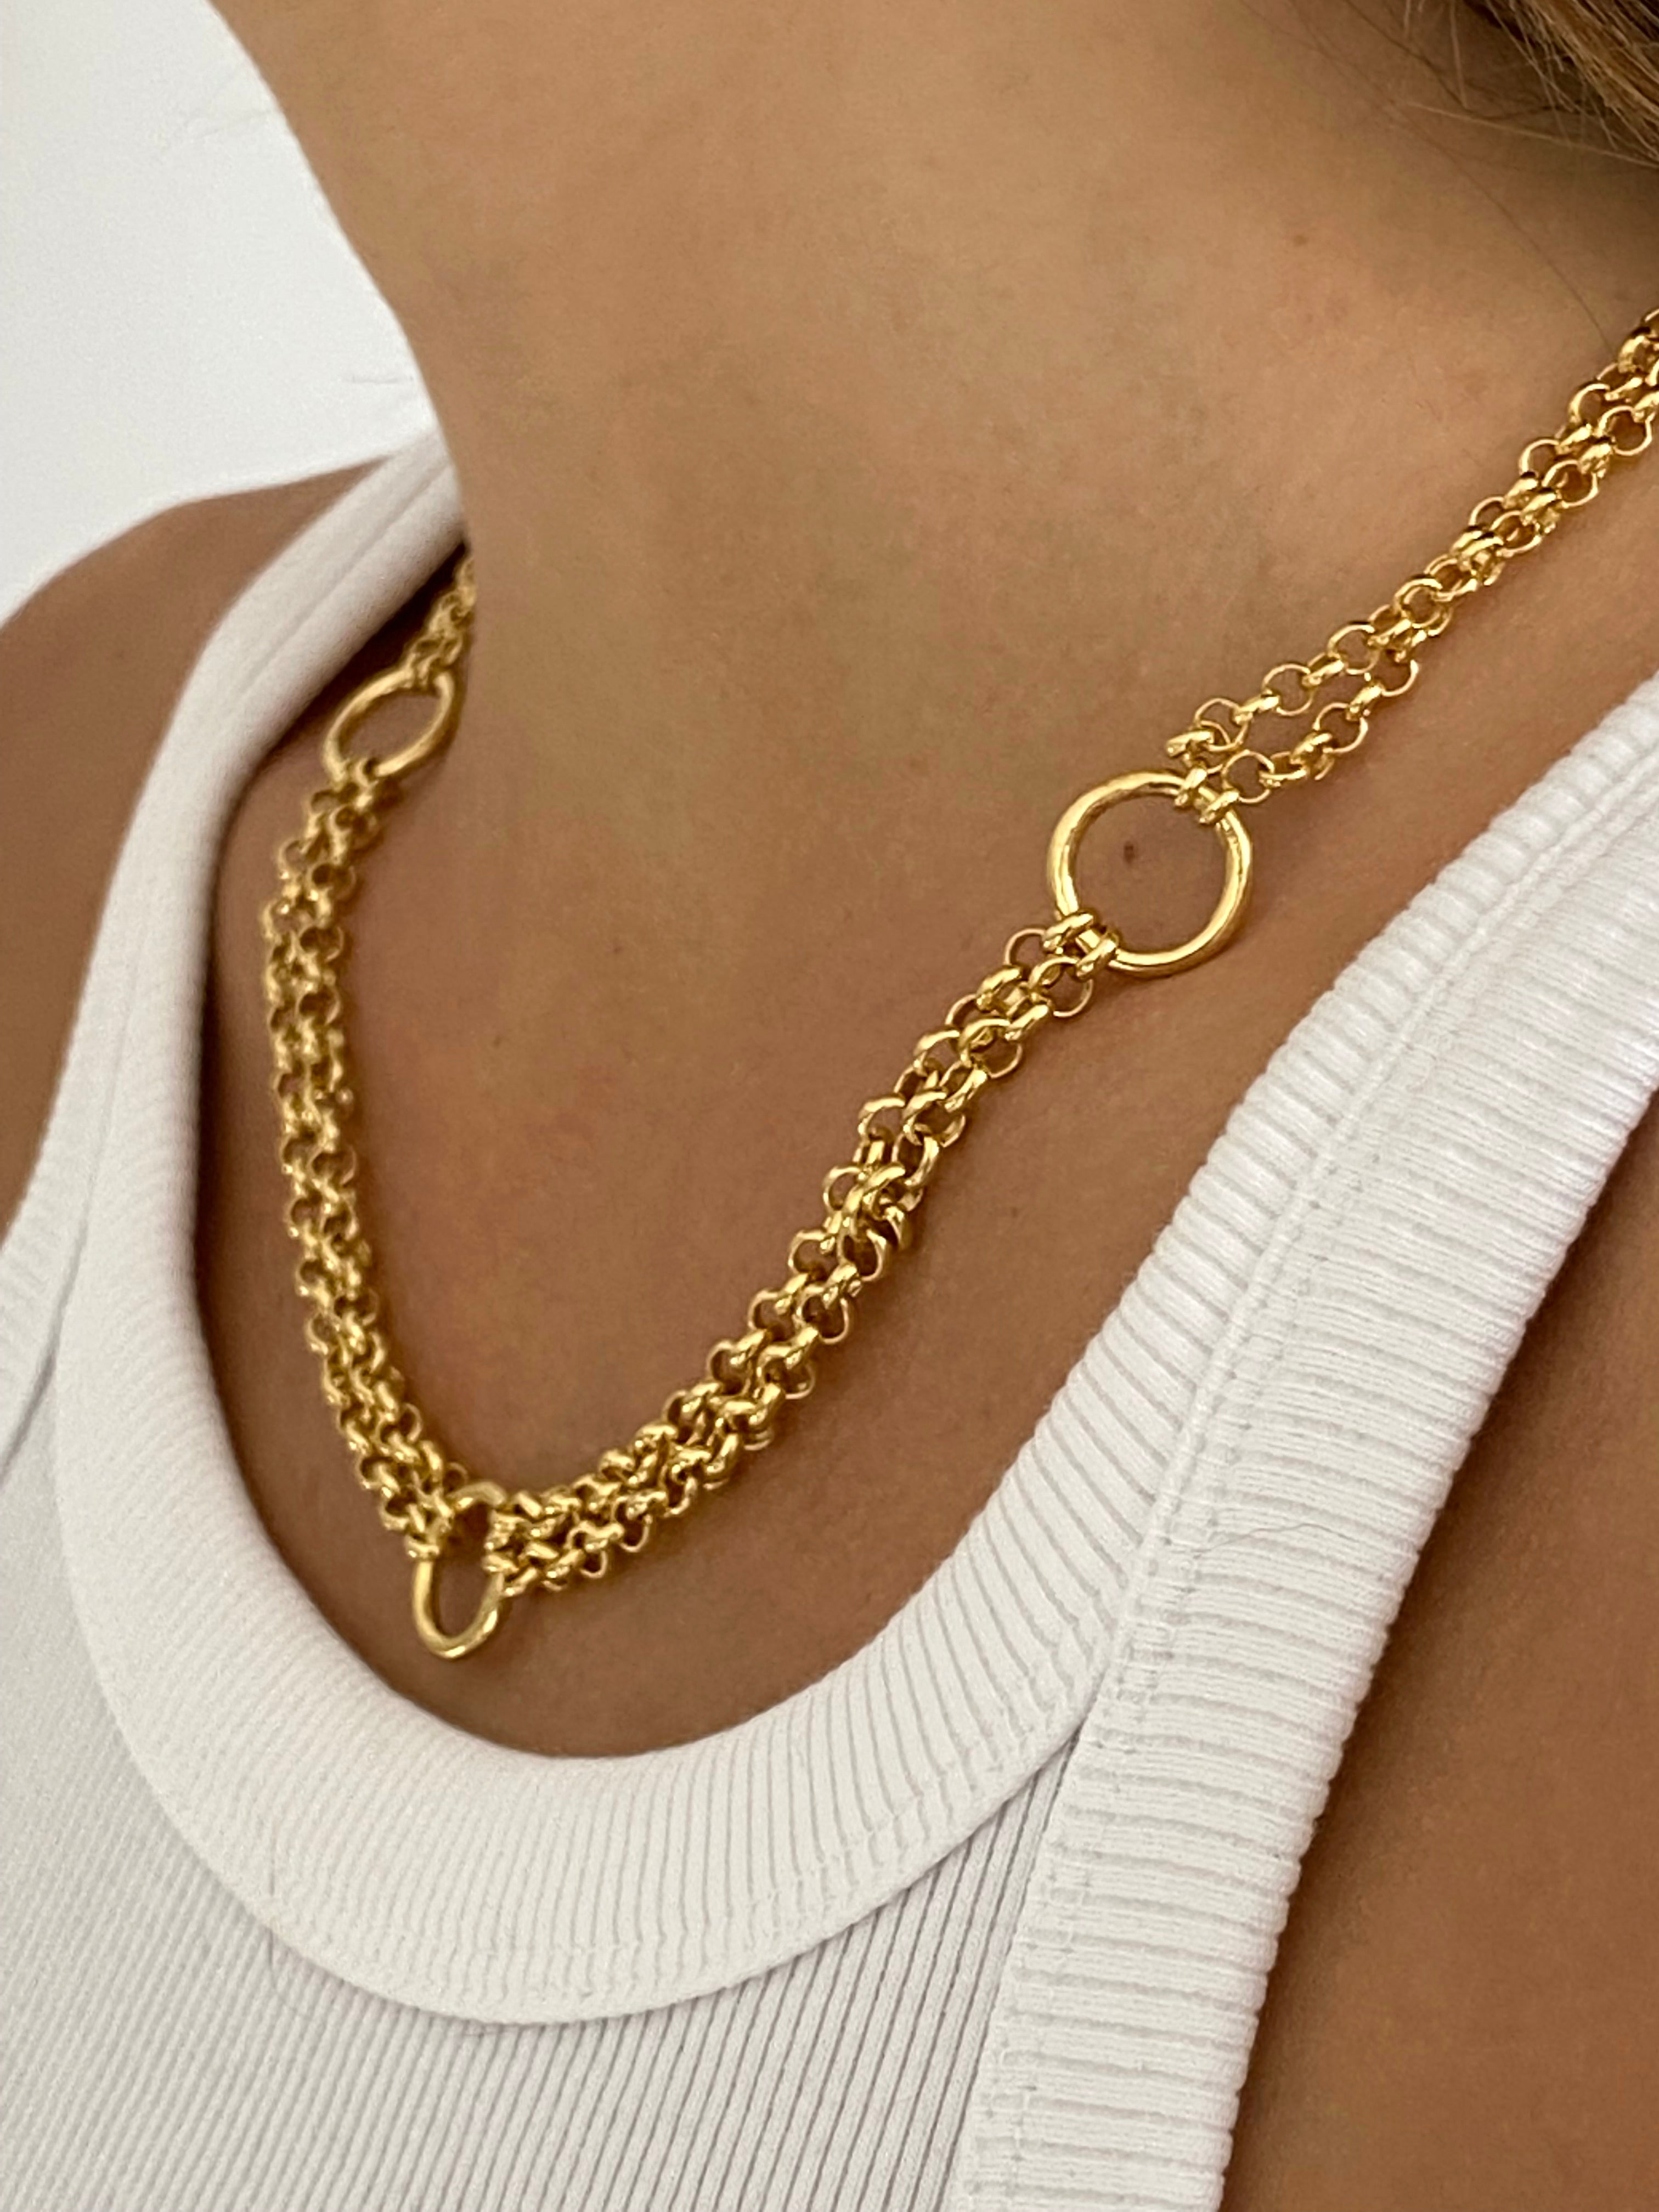 llayers cool Gold women minimal long chain choker necklace with rings Hancrafted in Brooklyn New York 8